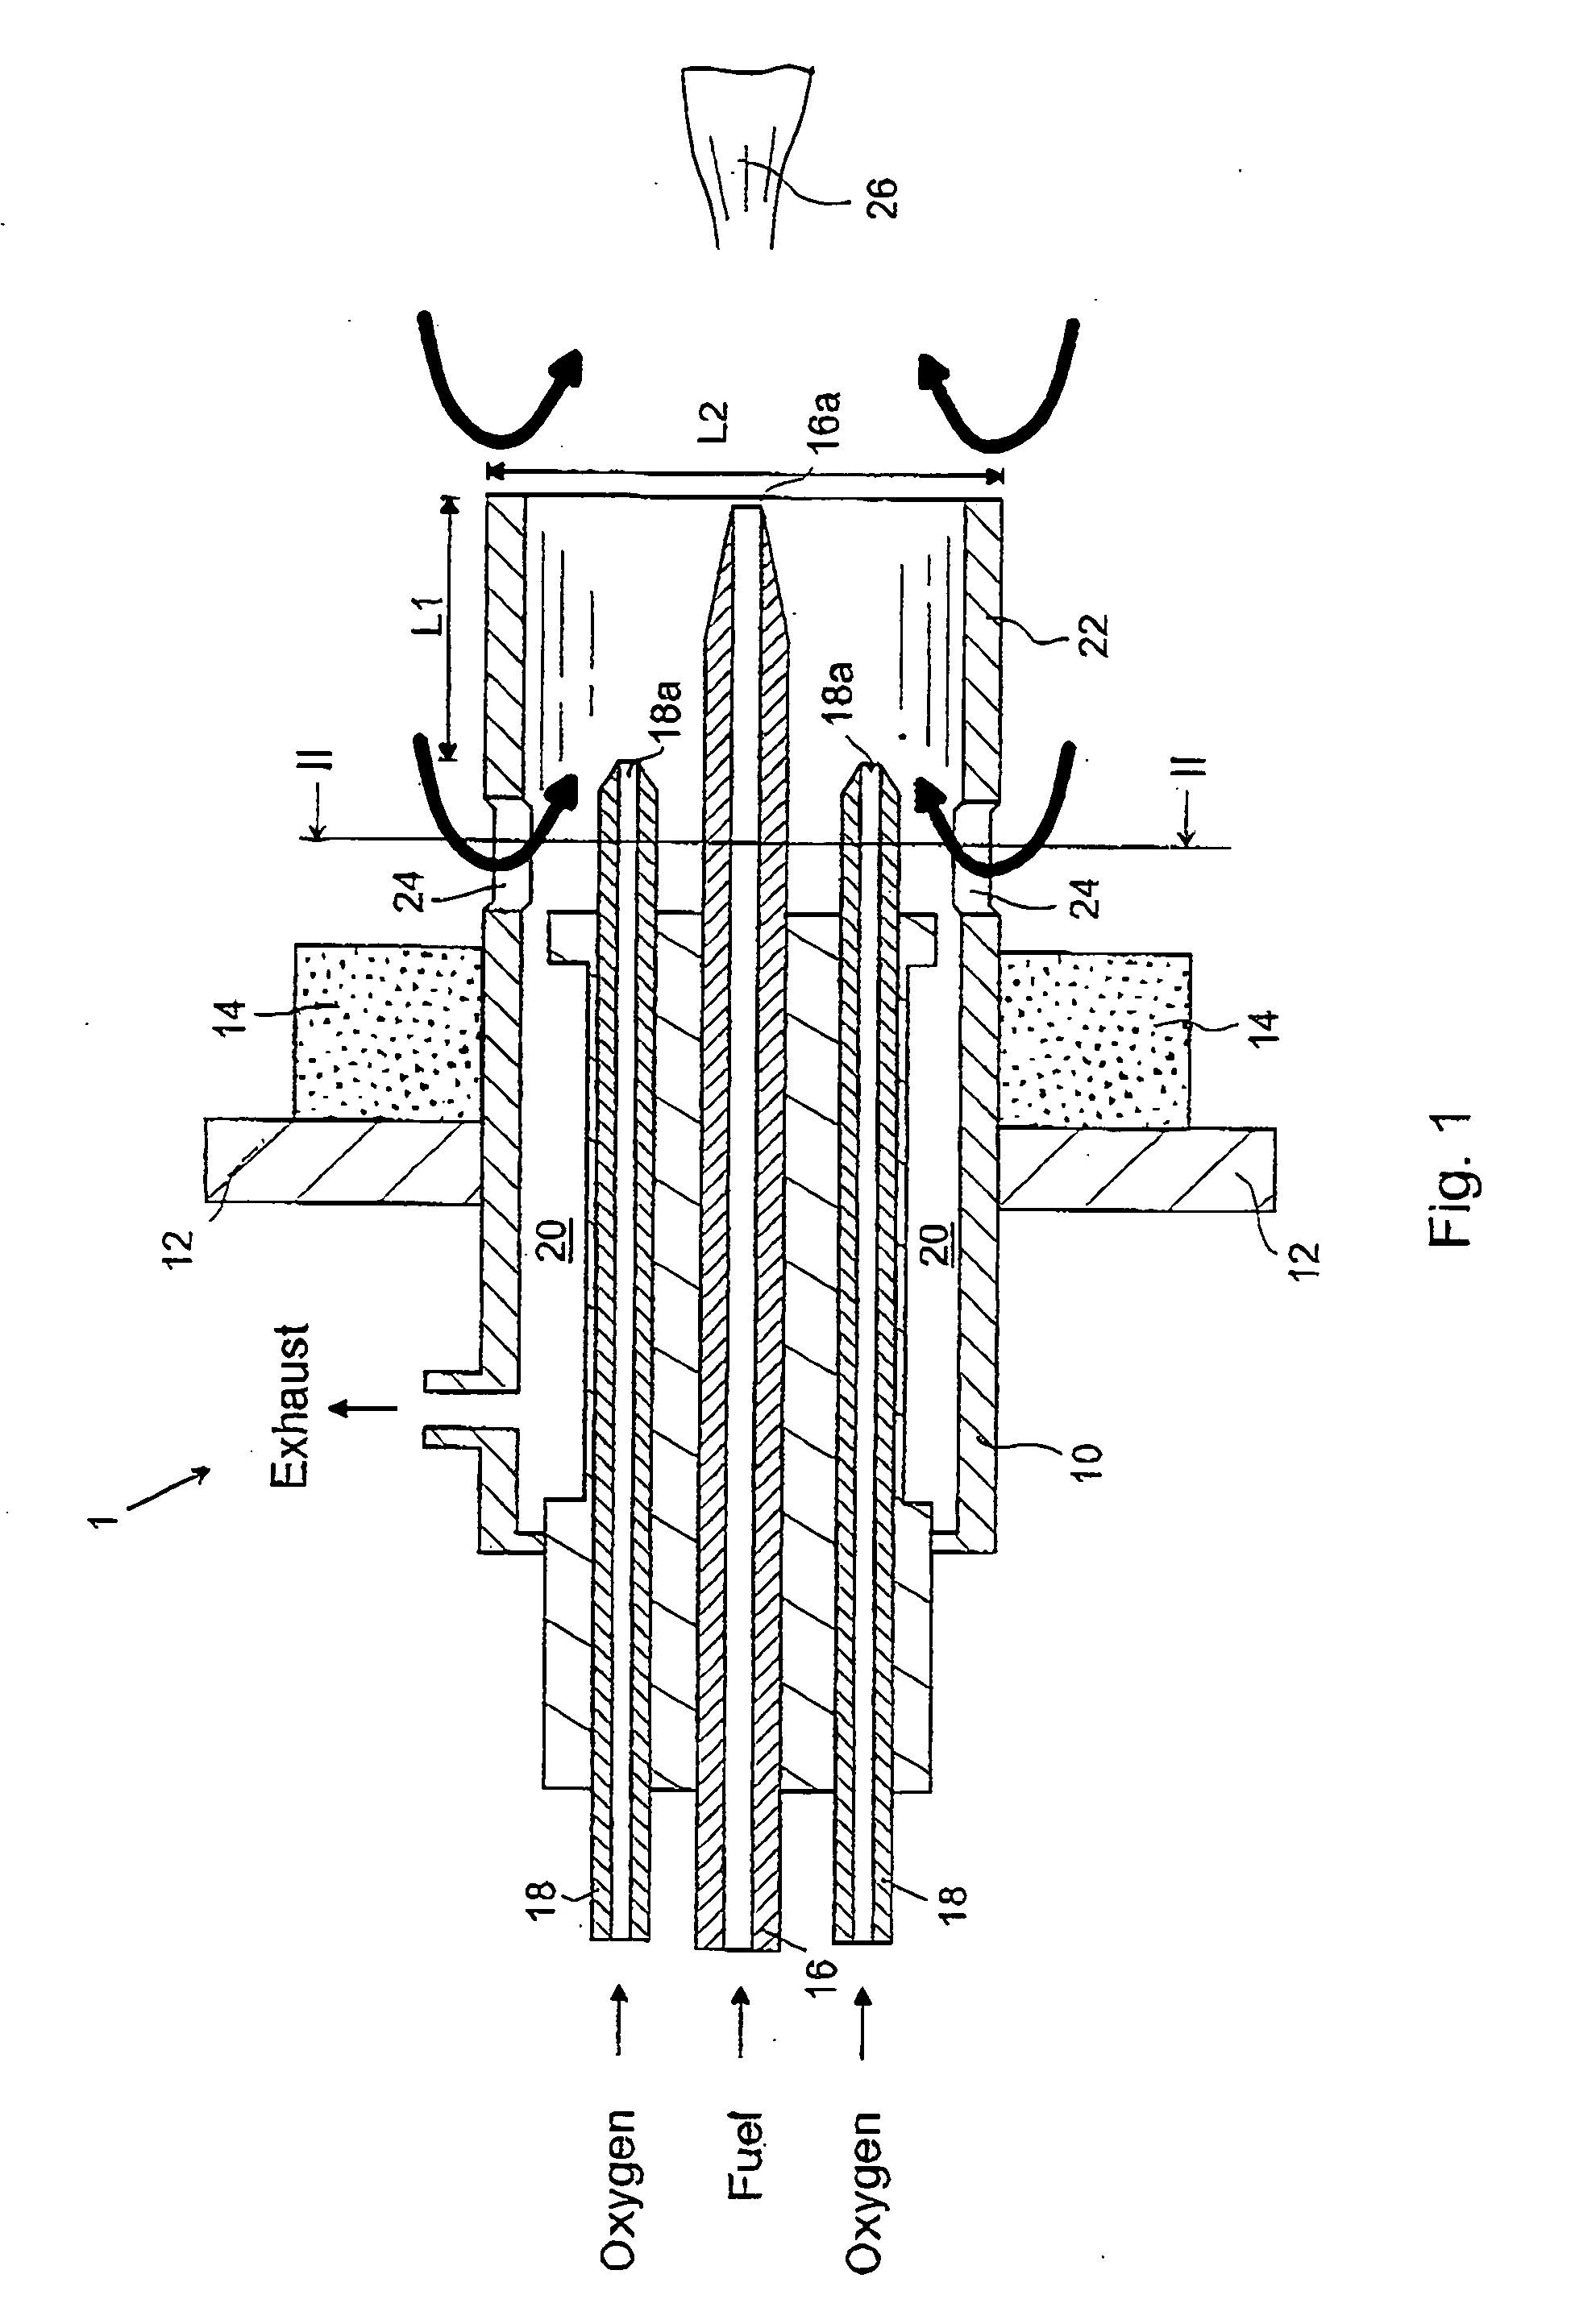 Method and apparatus for heat treatment